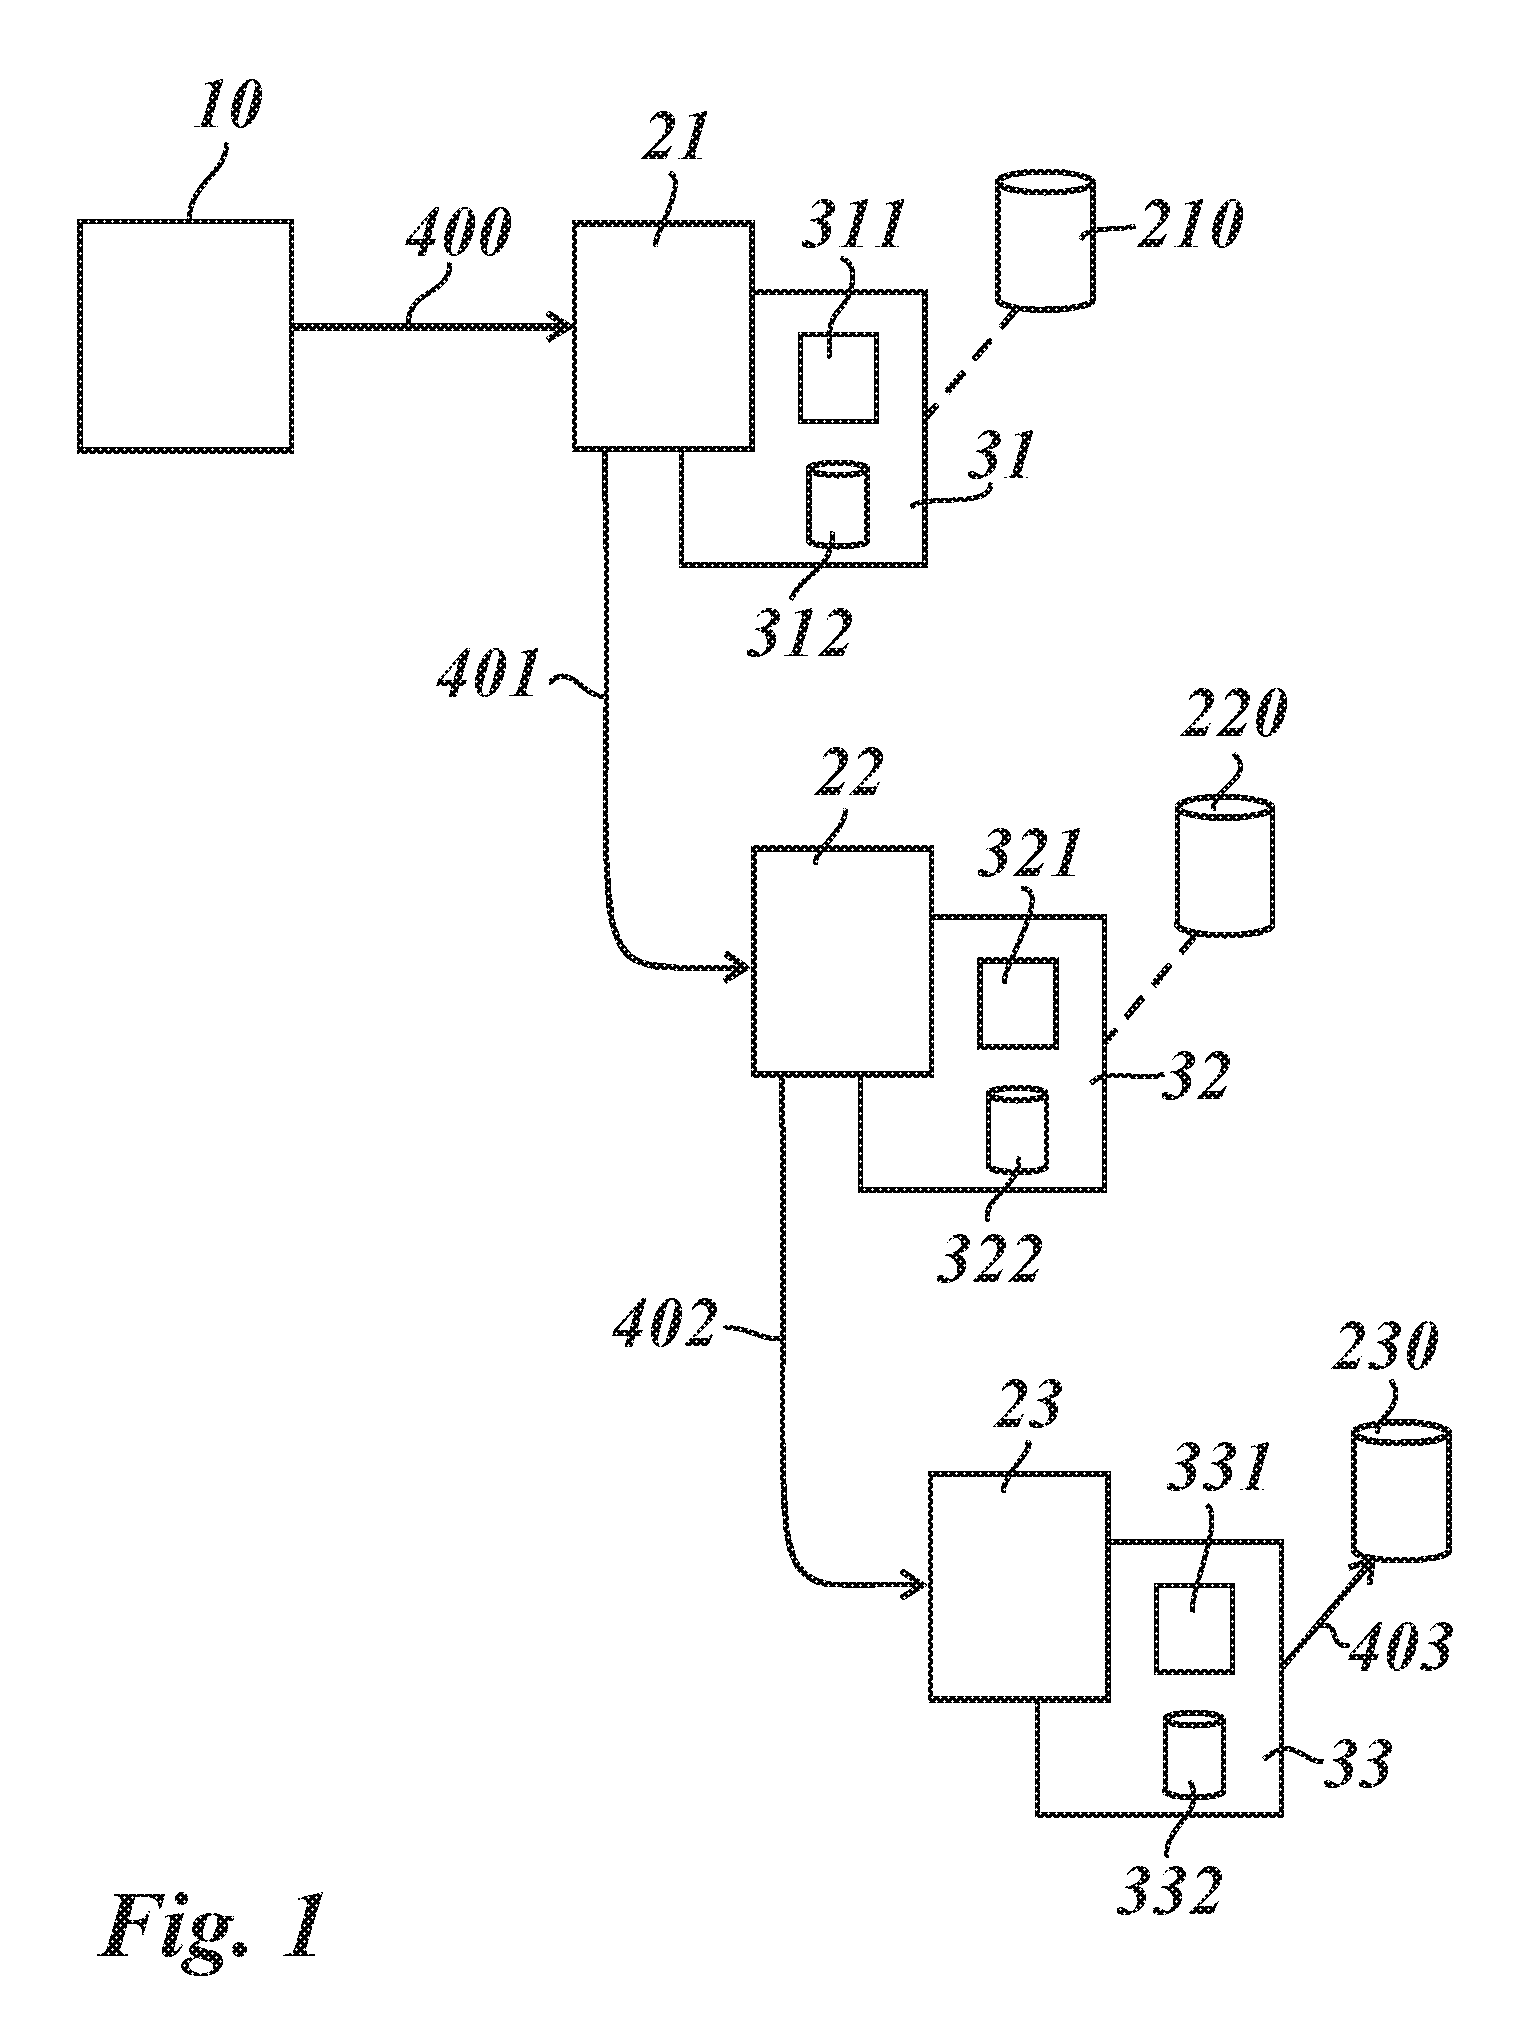 Method of providing an improved call forwarding service